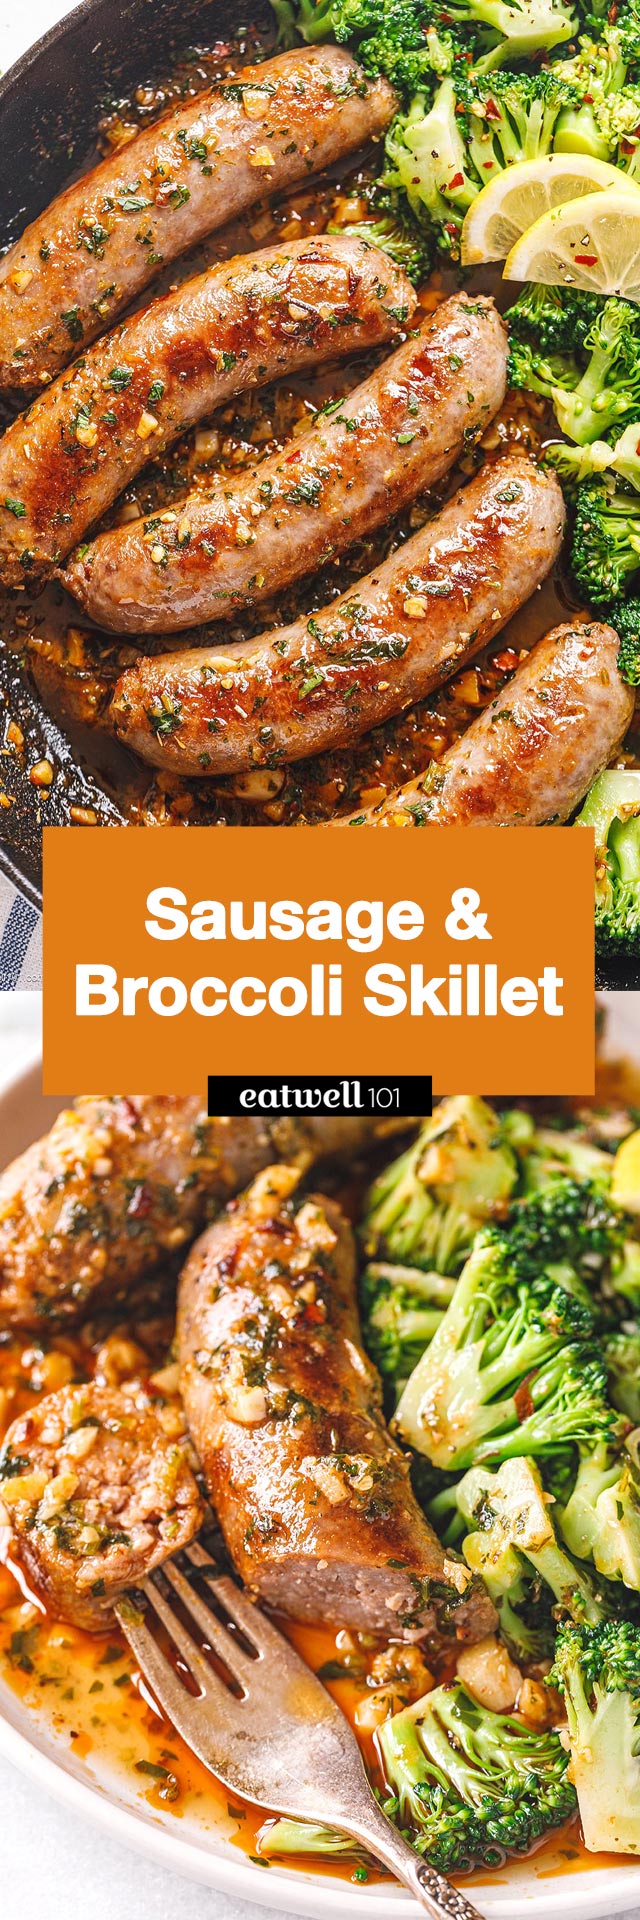 Garlic Butter Sausages and Broccoli Skillet - #sausage #broccoli #recipe #eatwell101 - This easy sausage and broccoli skillet recipe is super nourishing and easy to make  - On the table in 25 minutes.